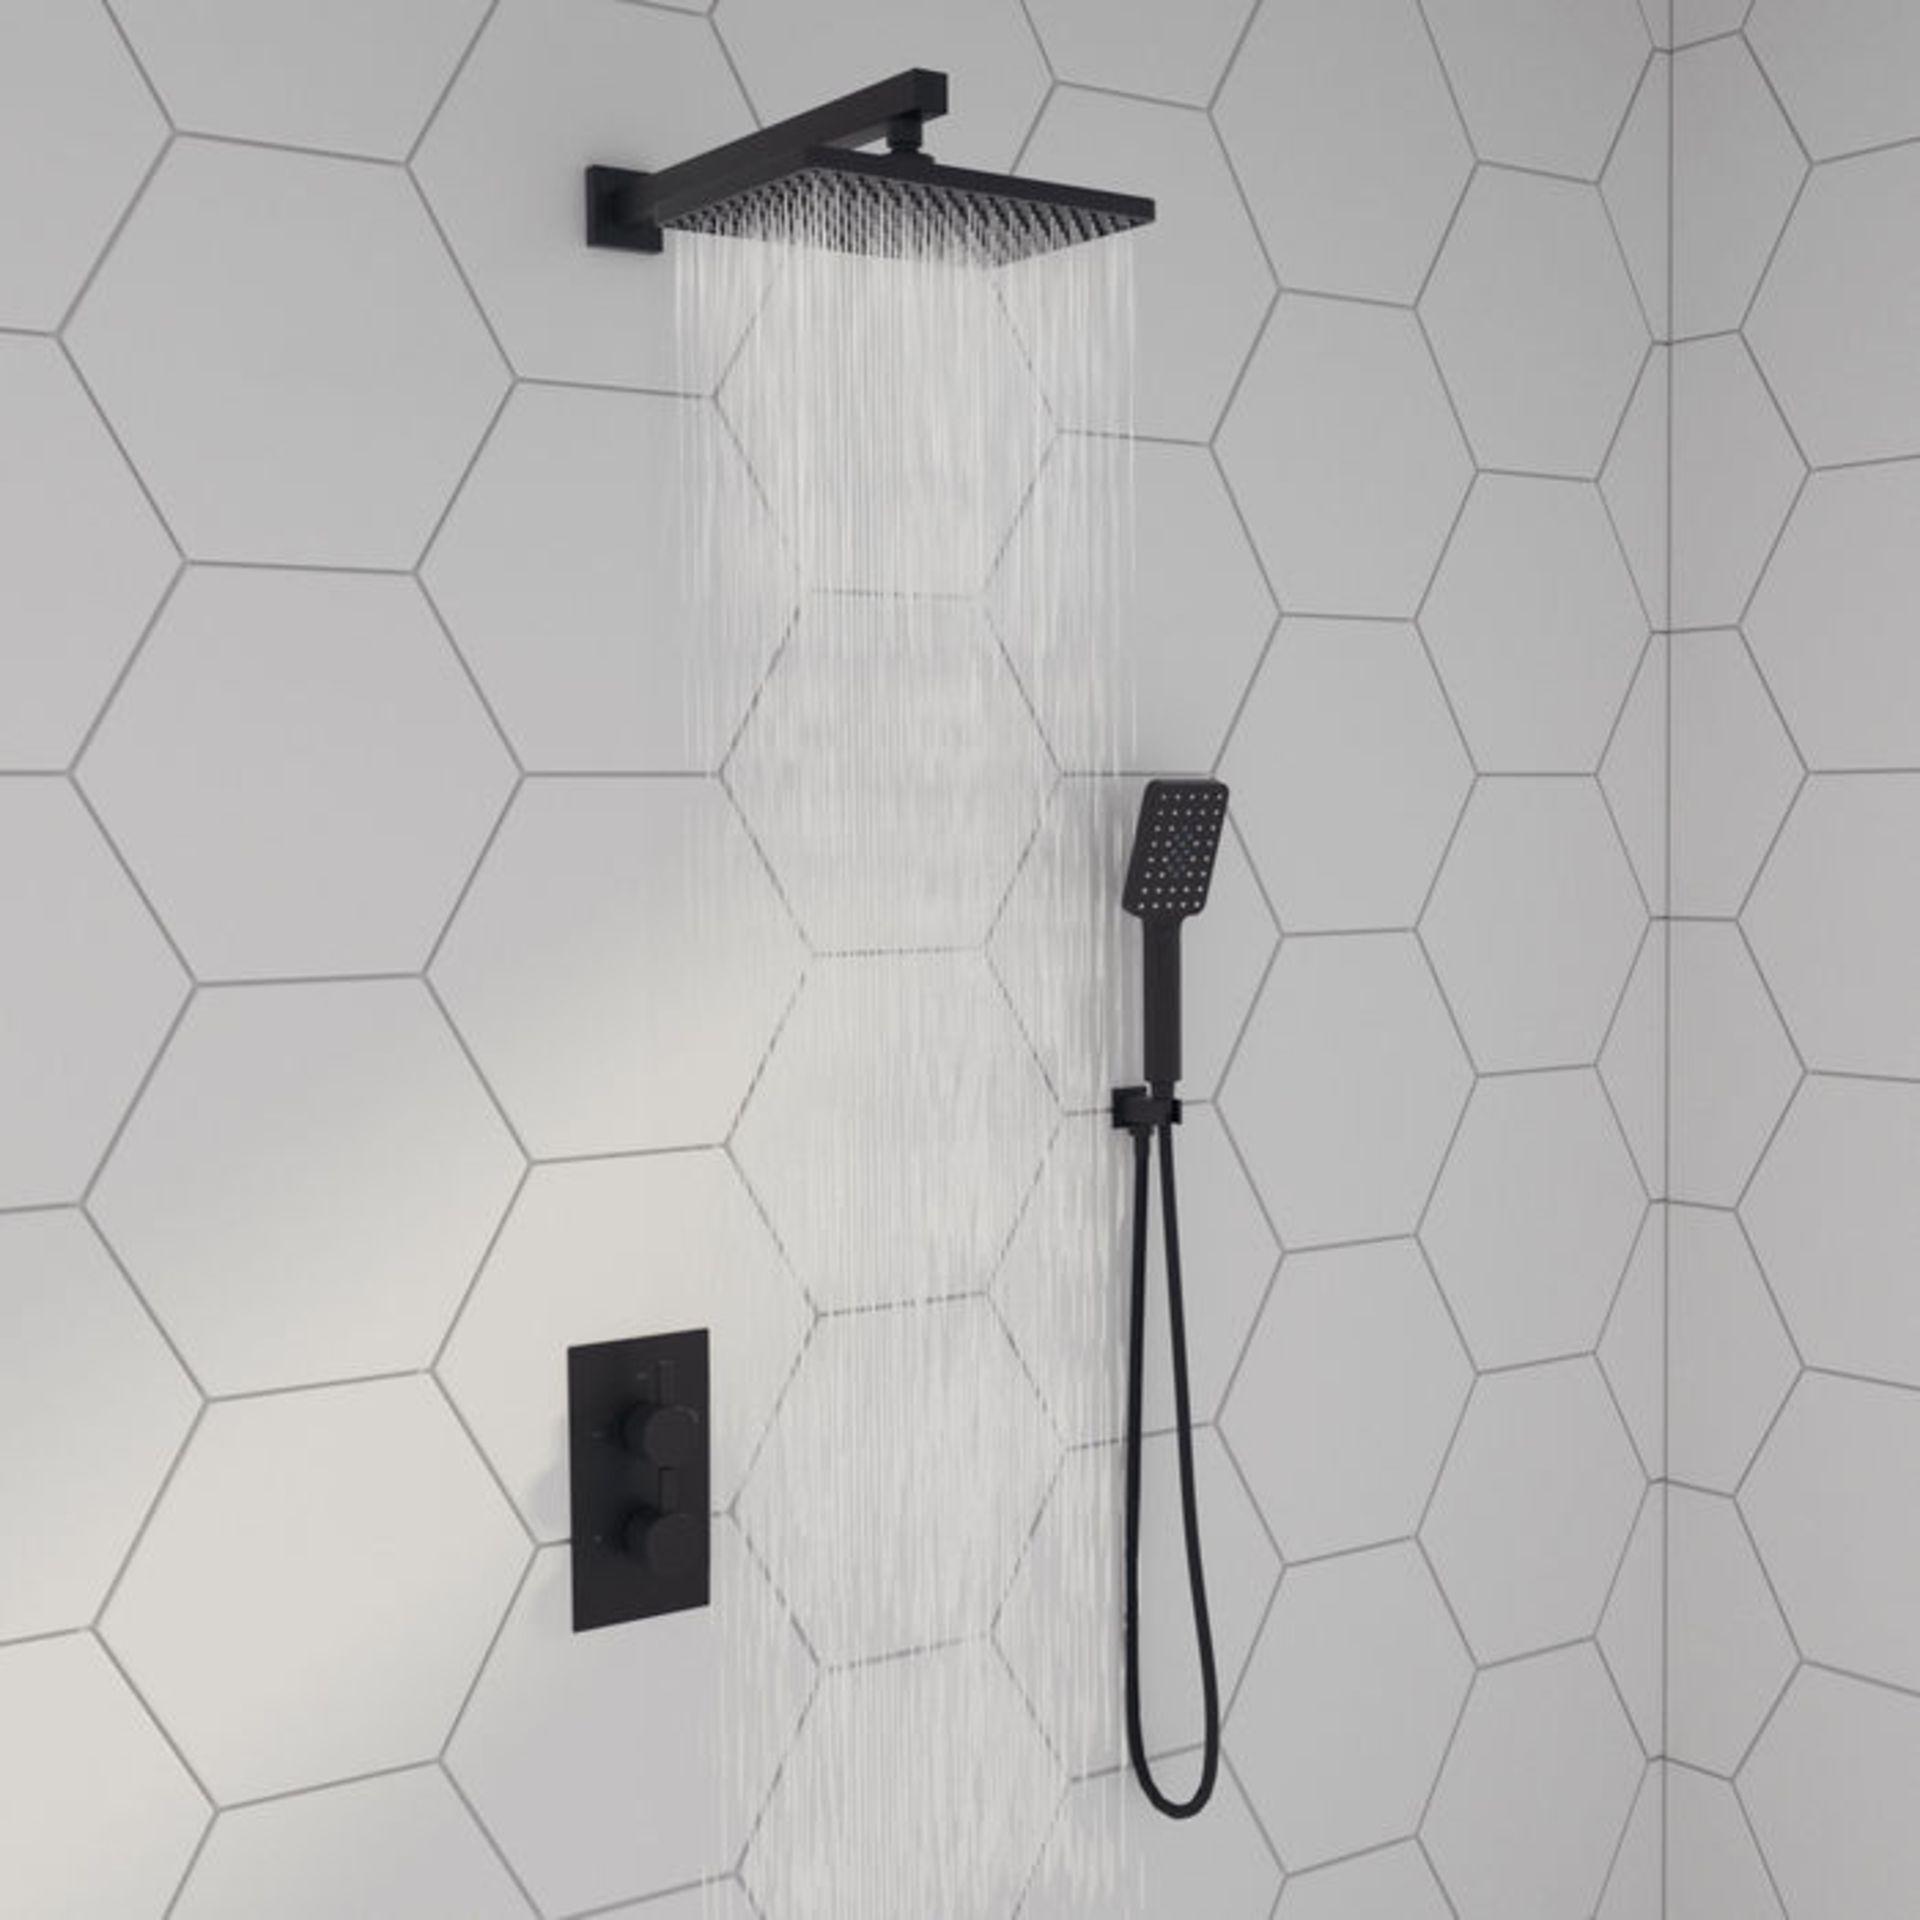 New & Boxed Square Concealed Thermostatic Mixer Shower Kit & Large Head, Matte Black.Rrp £499.... - Image 2 of 2